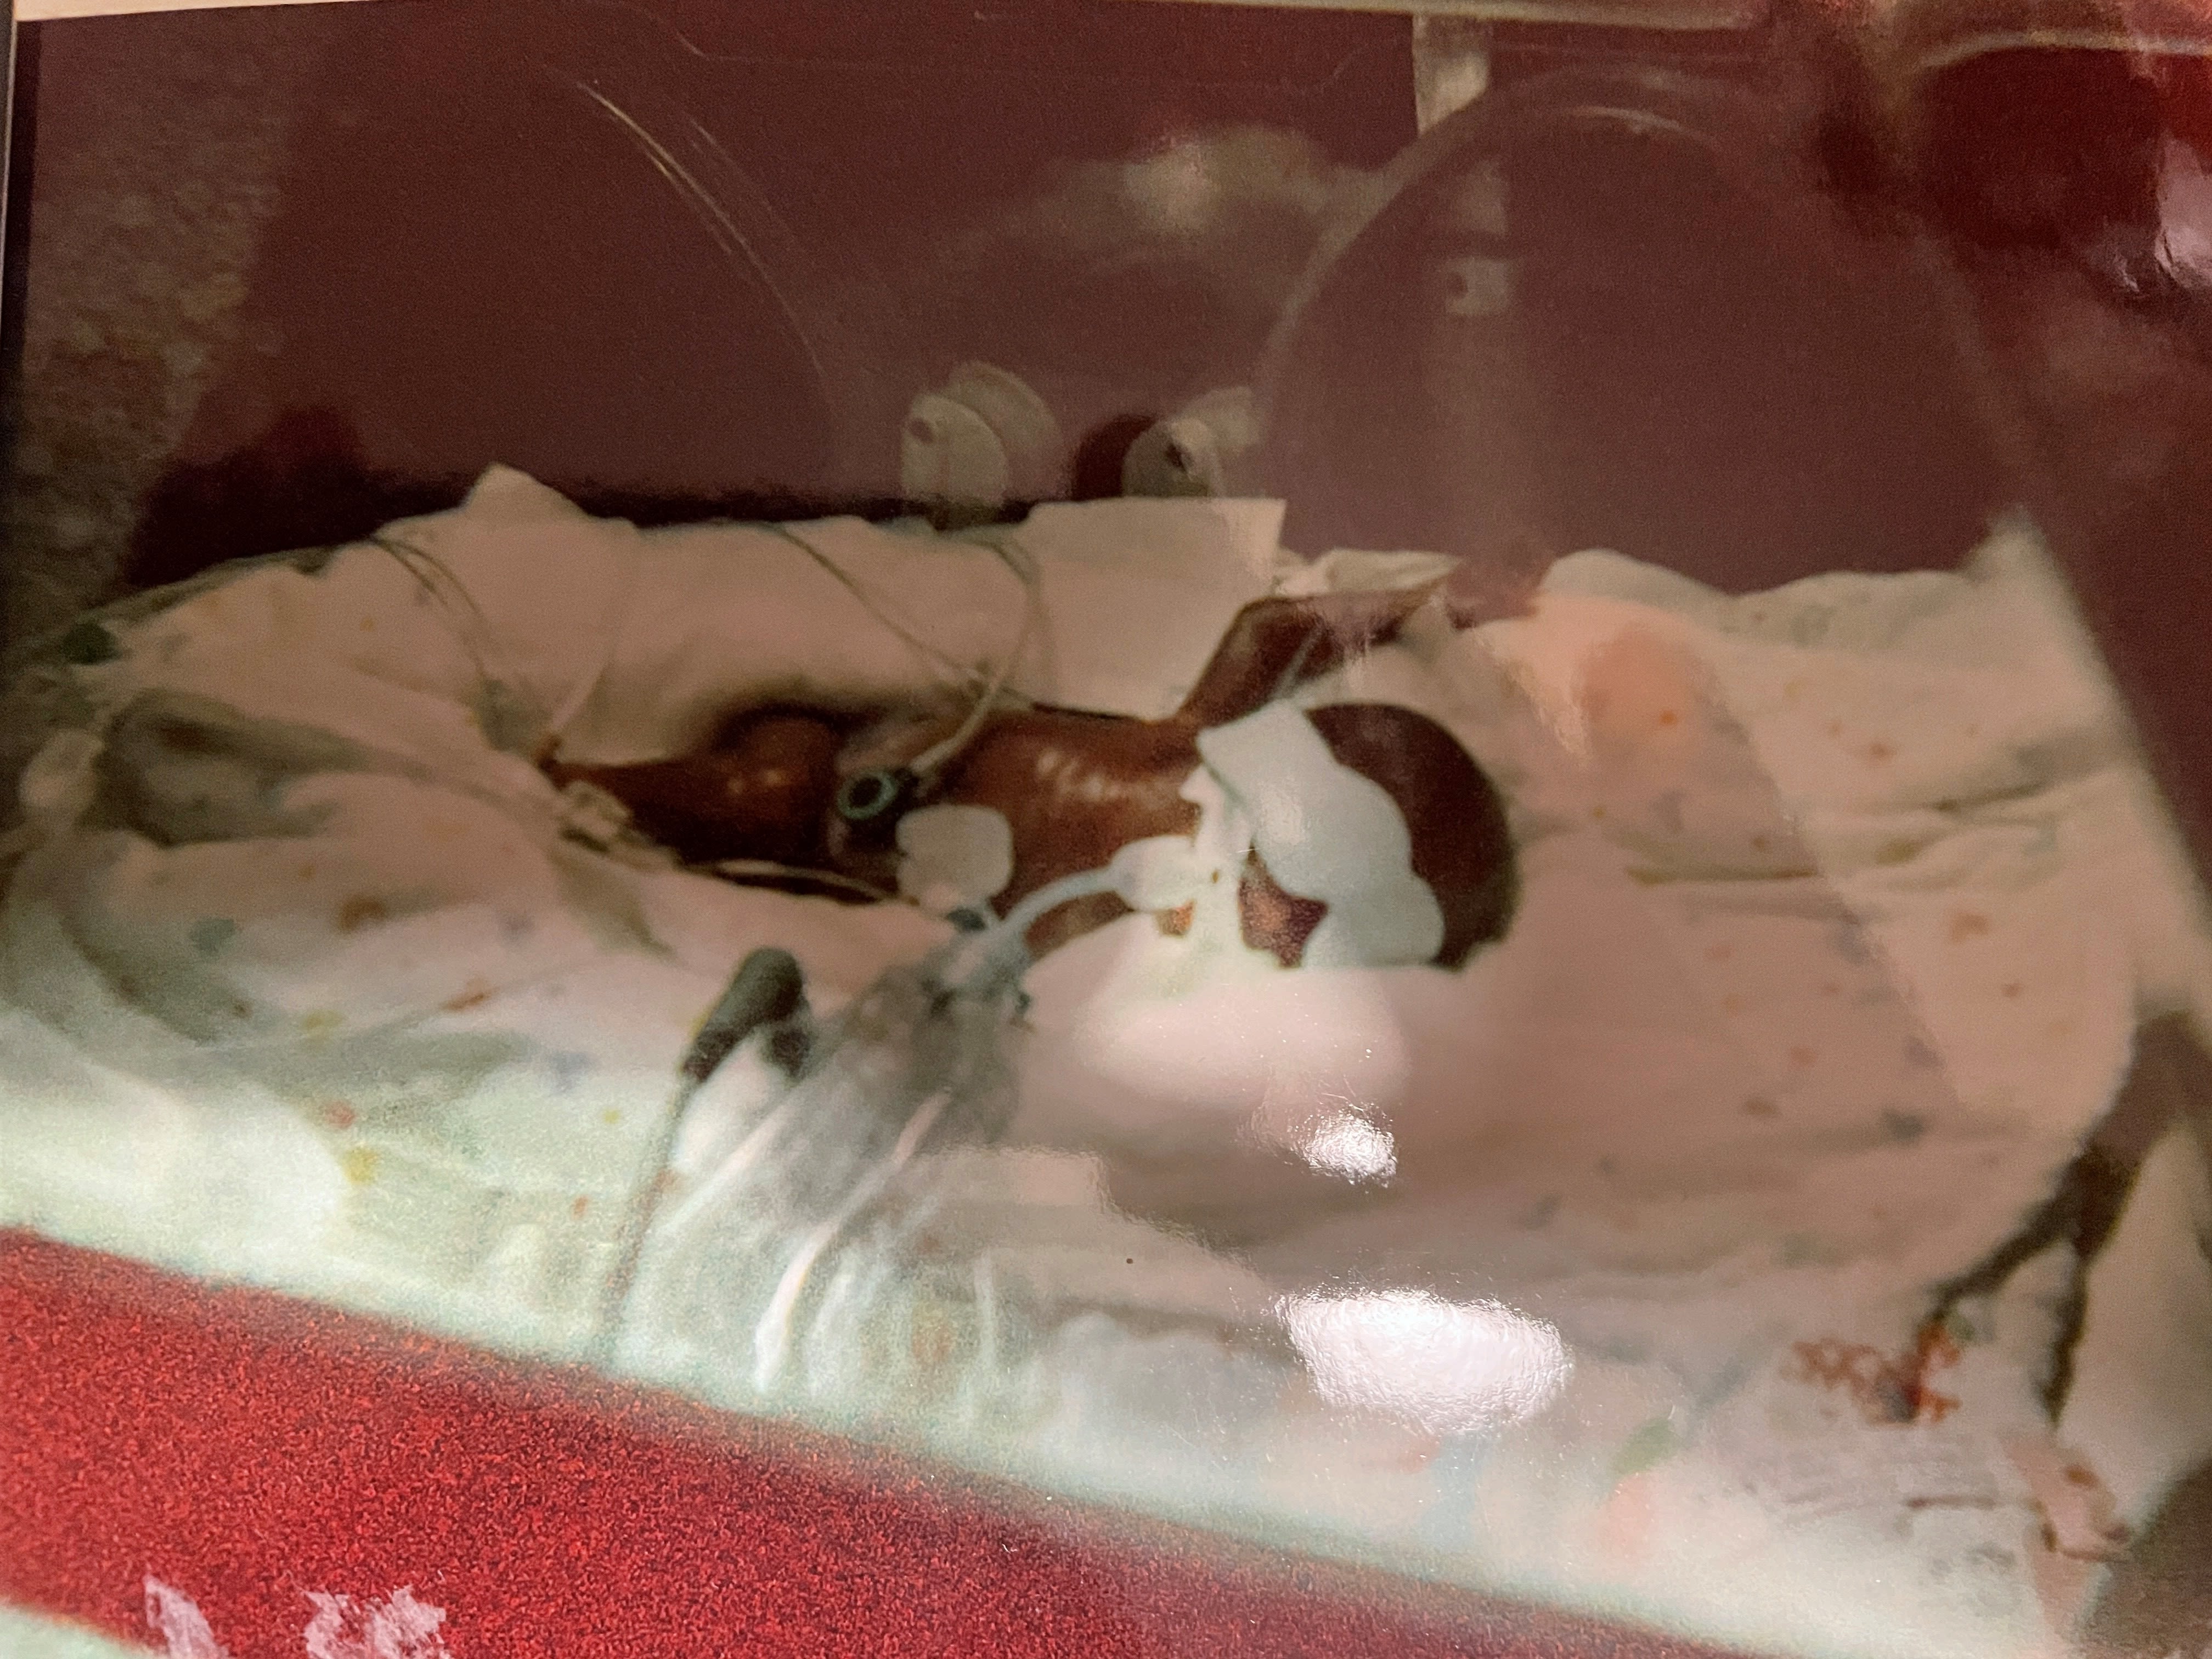 Alisha, soon after her birth at 24 weeks. She is in an incubator, covered in tubes and incredibly tiny